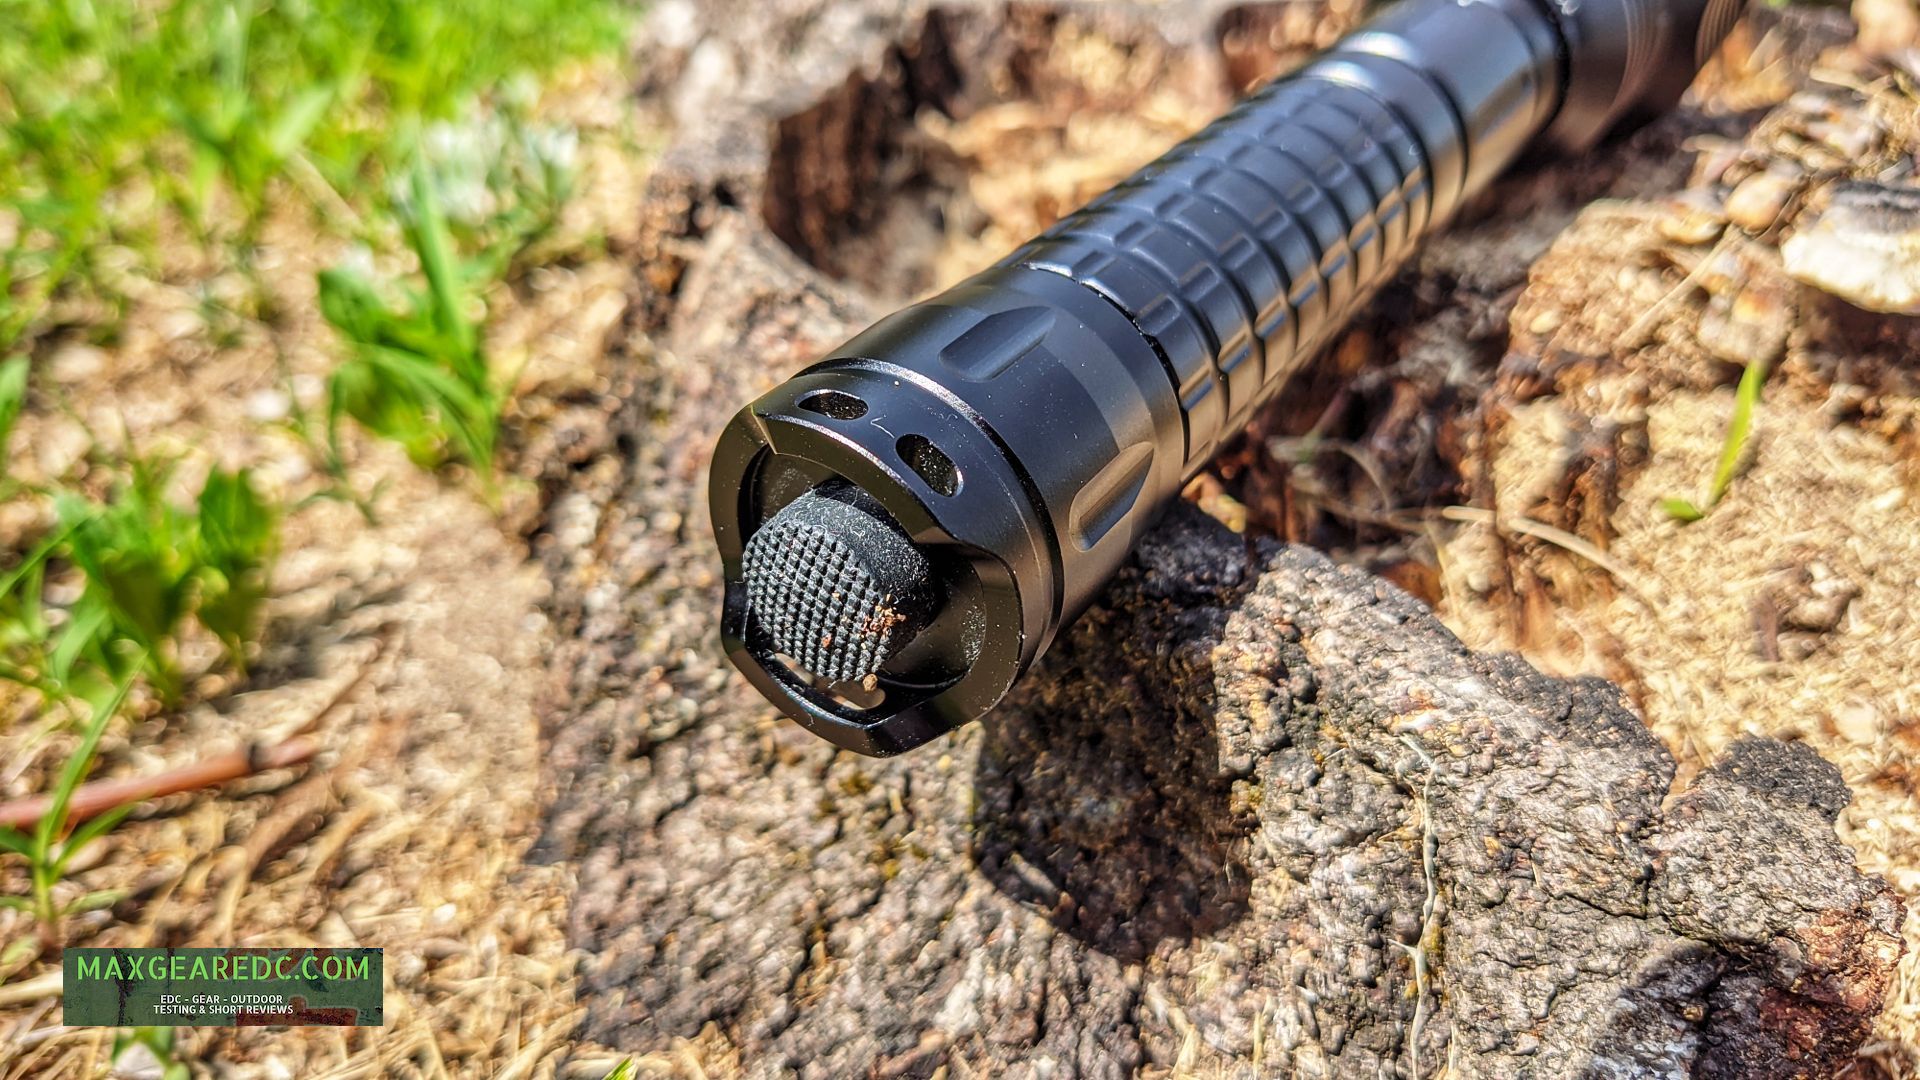 Sofirn_SF47W_flashlight_Review_21700_thrower_maxgearedc.com_EDC_GEAR_OUTDOOR_TESTING_and_SHORT_REVIEWS_10